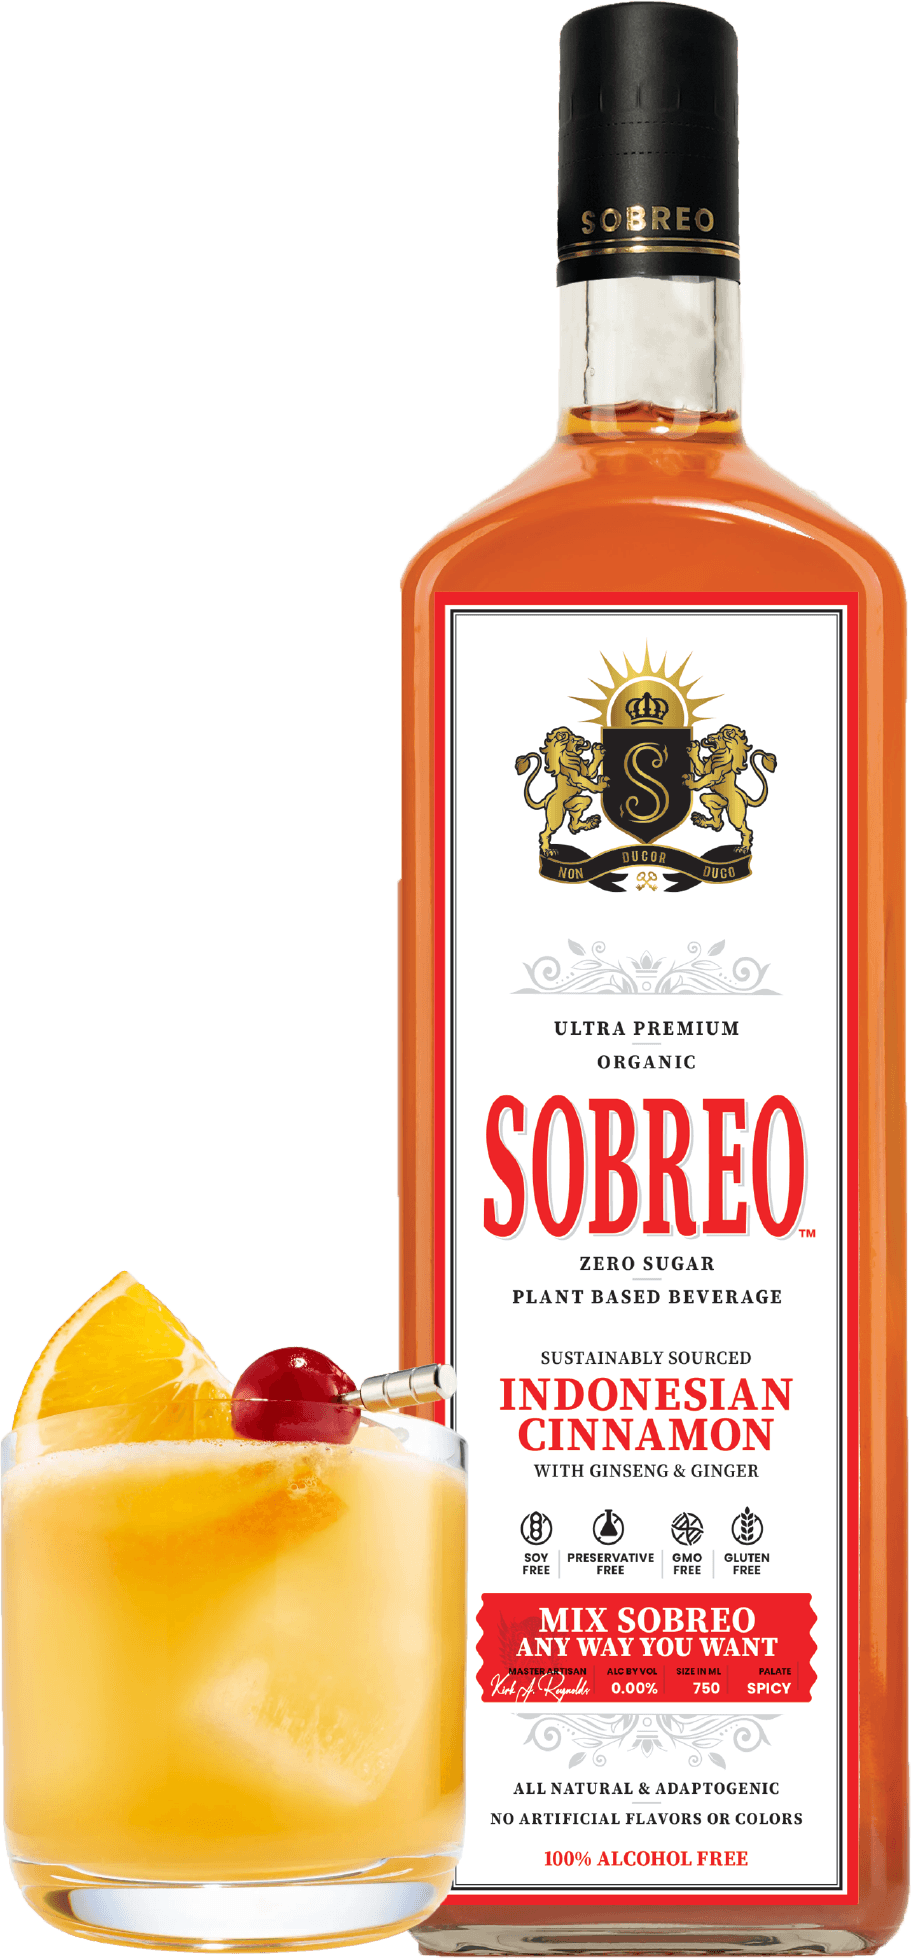 Sobreo non alcoholic cocktail and mocktail mixer in Indonesian Cinnamon spicy flavor into an Old Fashioned recipe